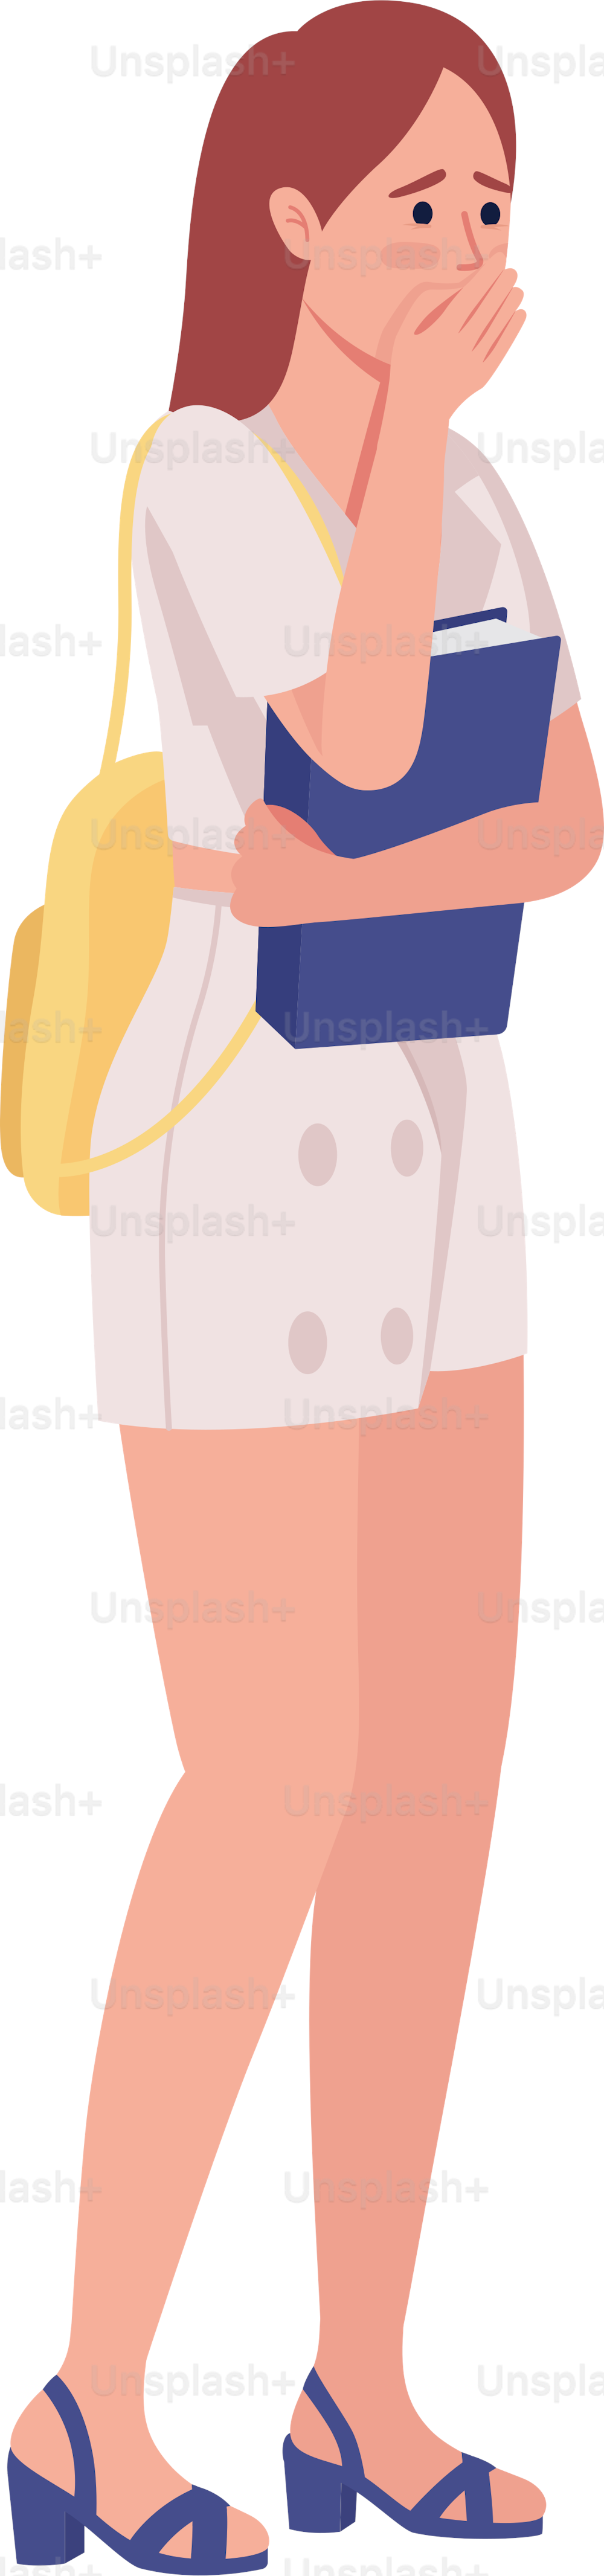 Confused woman with textbook semi flat color vector character. Editable figure. Full body person on white. Emotion simple cartoon style illustration for web graphic design and animation